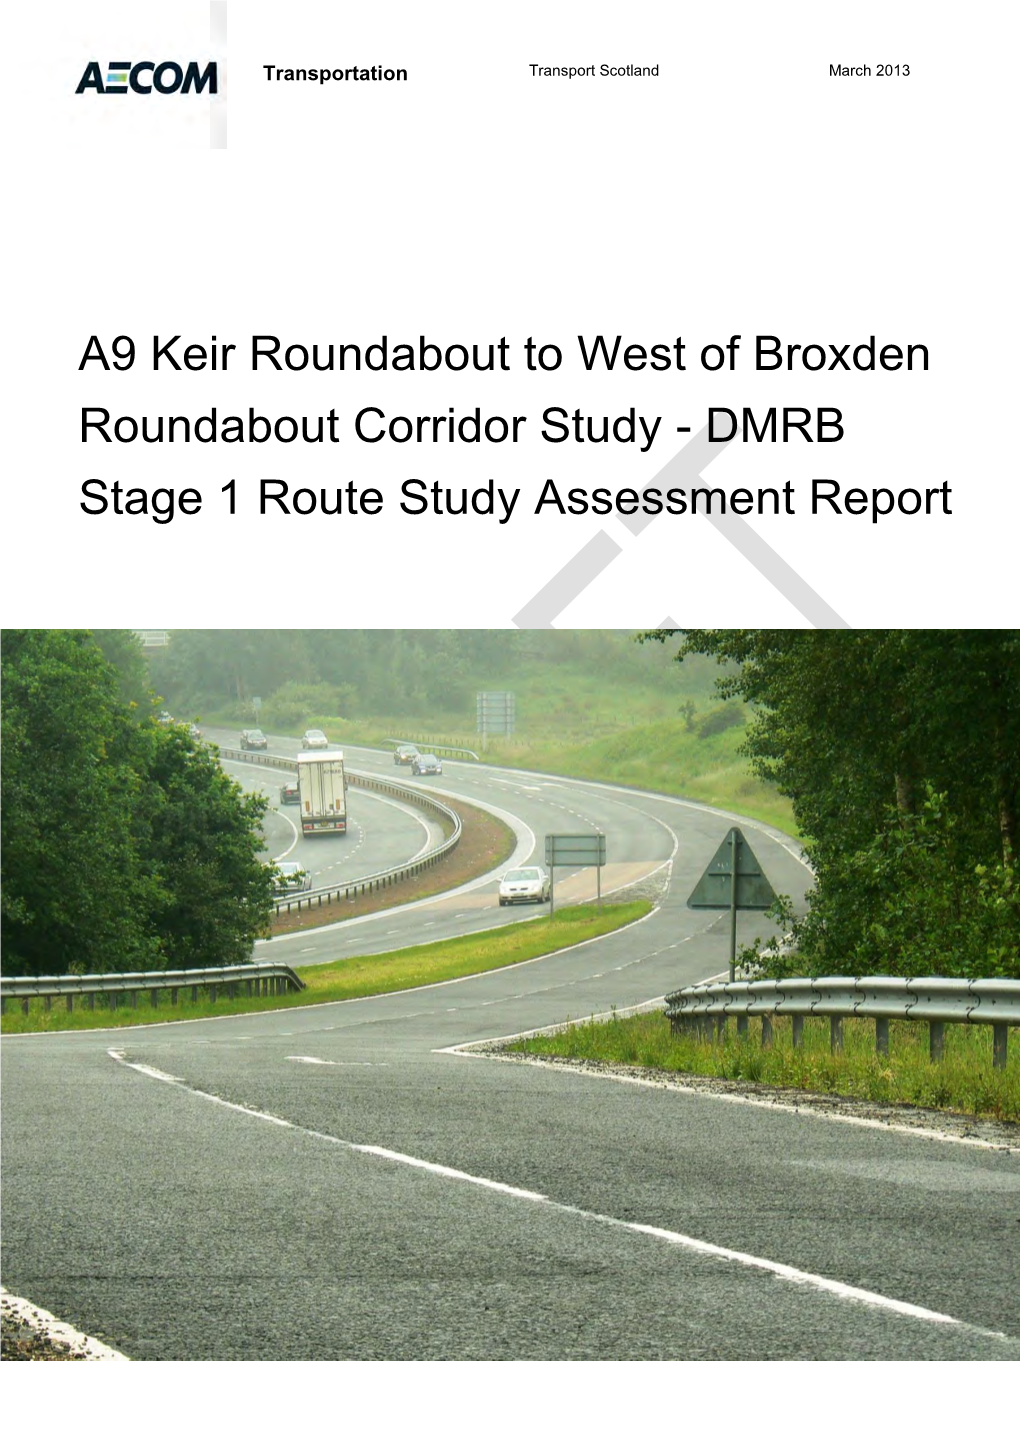 A9 Keir Roundabout to West of Broxden Roundabout Corridor Study - DMRB Stage 1 Route Study Assessment Report